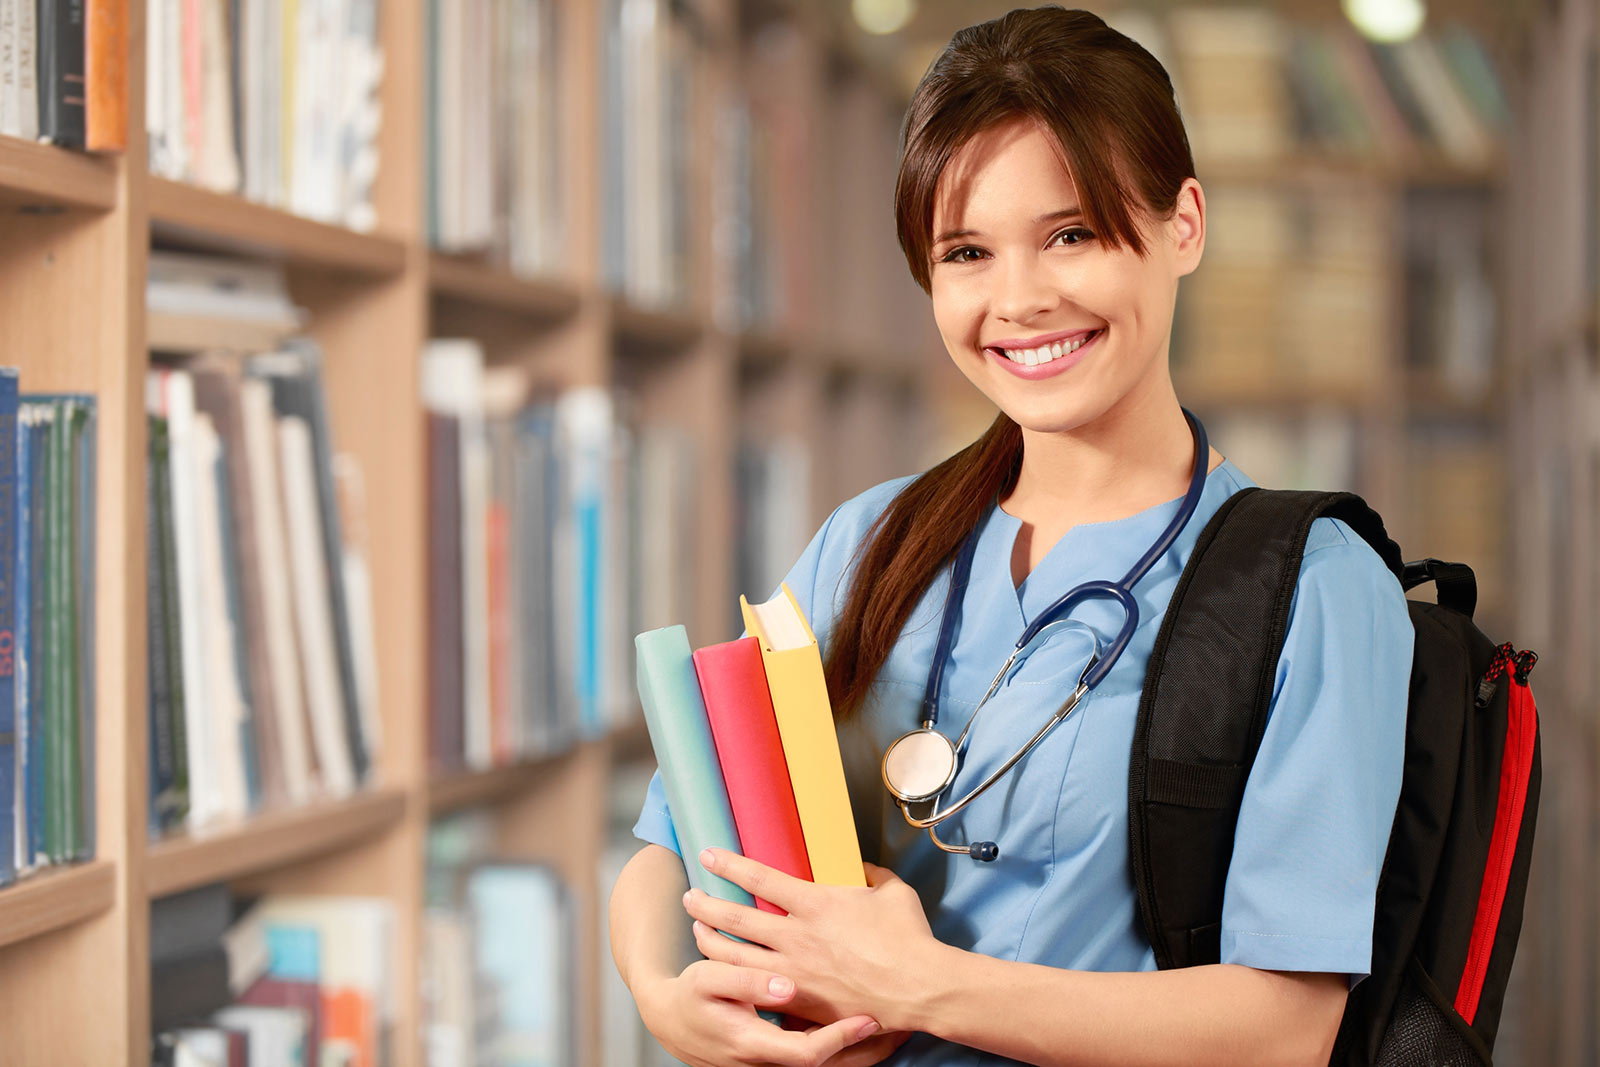 5 important tips for working with a nursing student